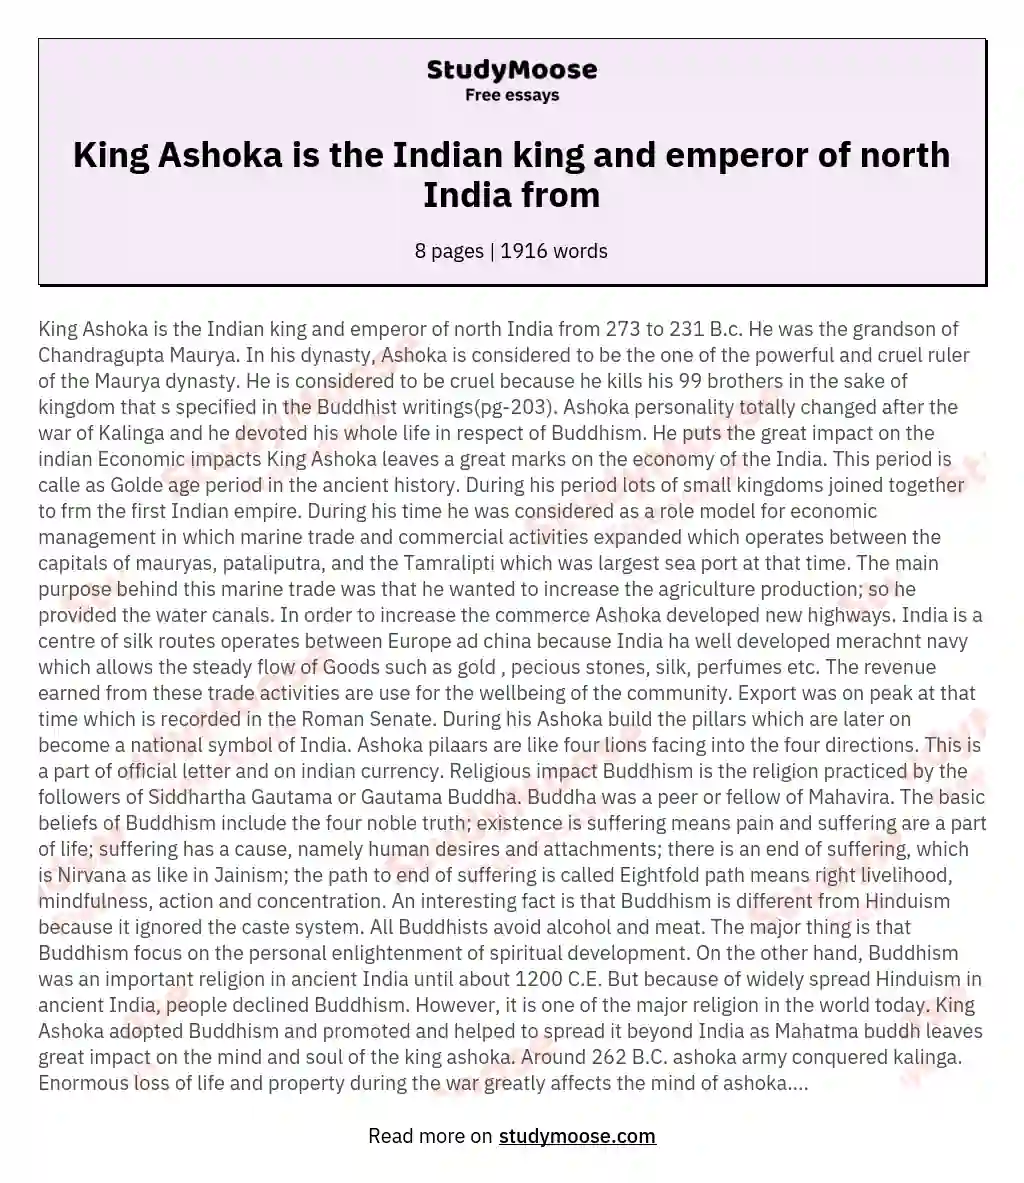 King Ashoka is the Indian king and emperor of north India from